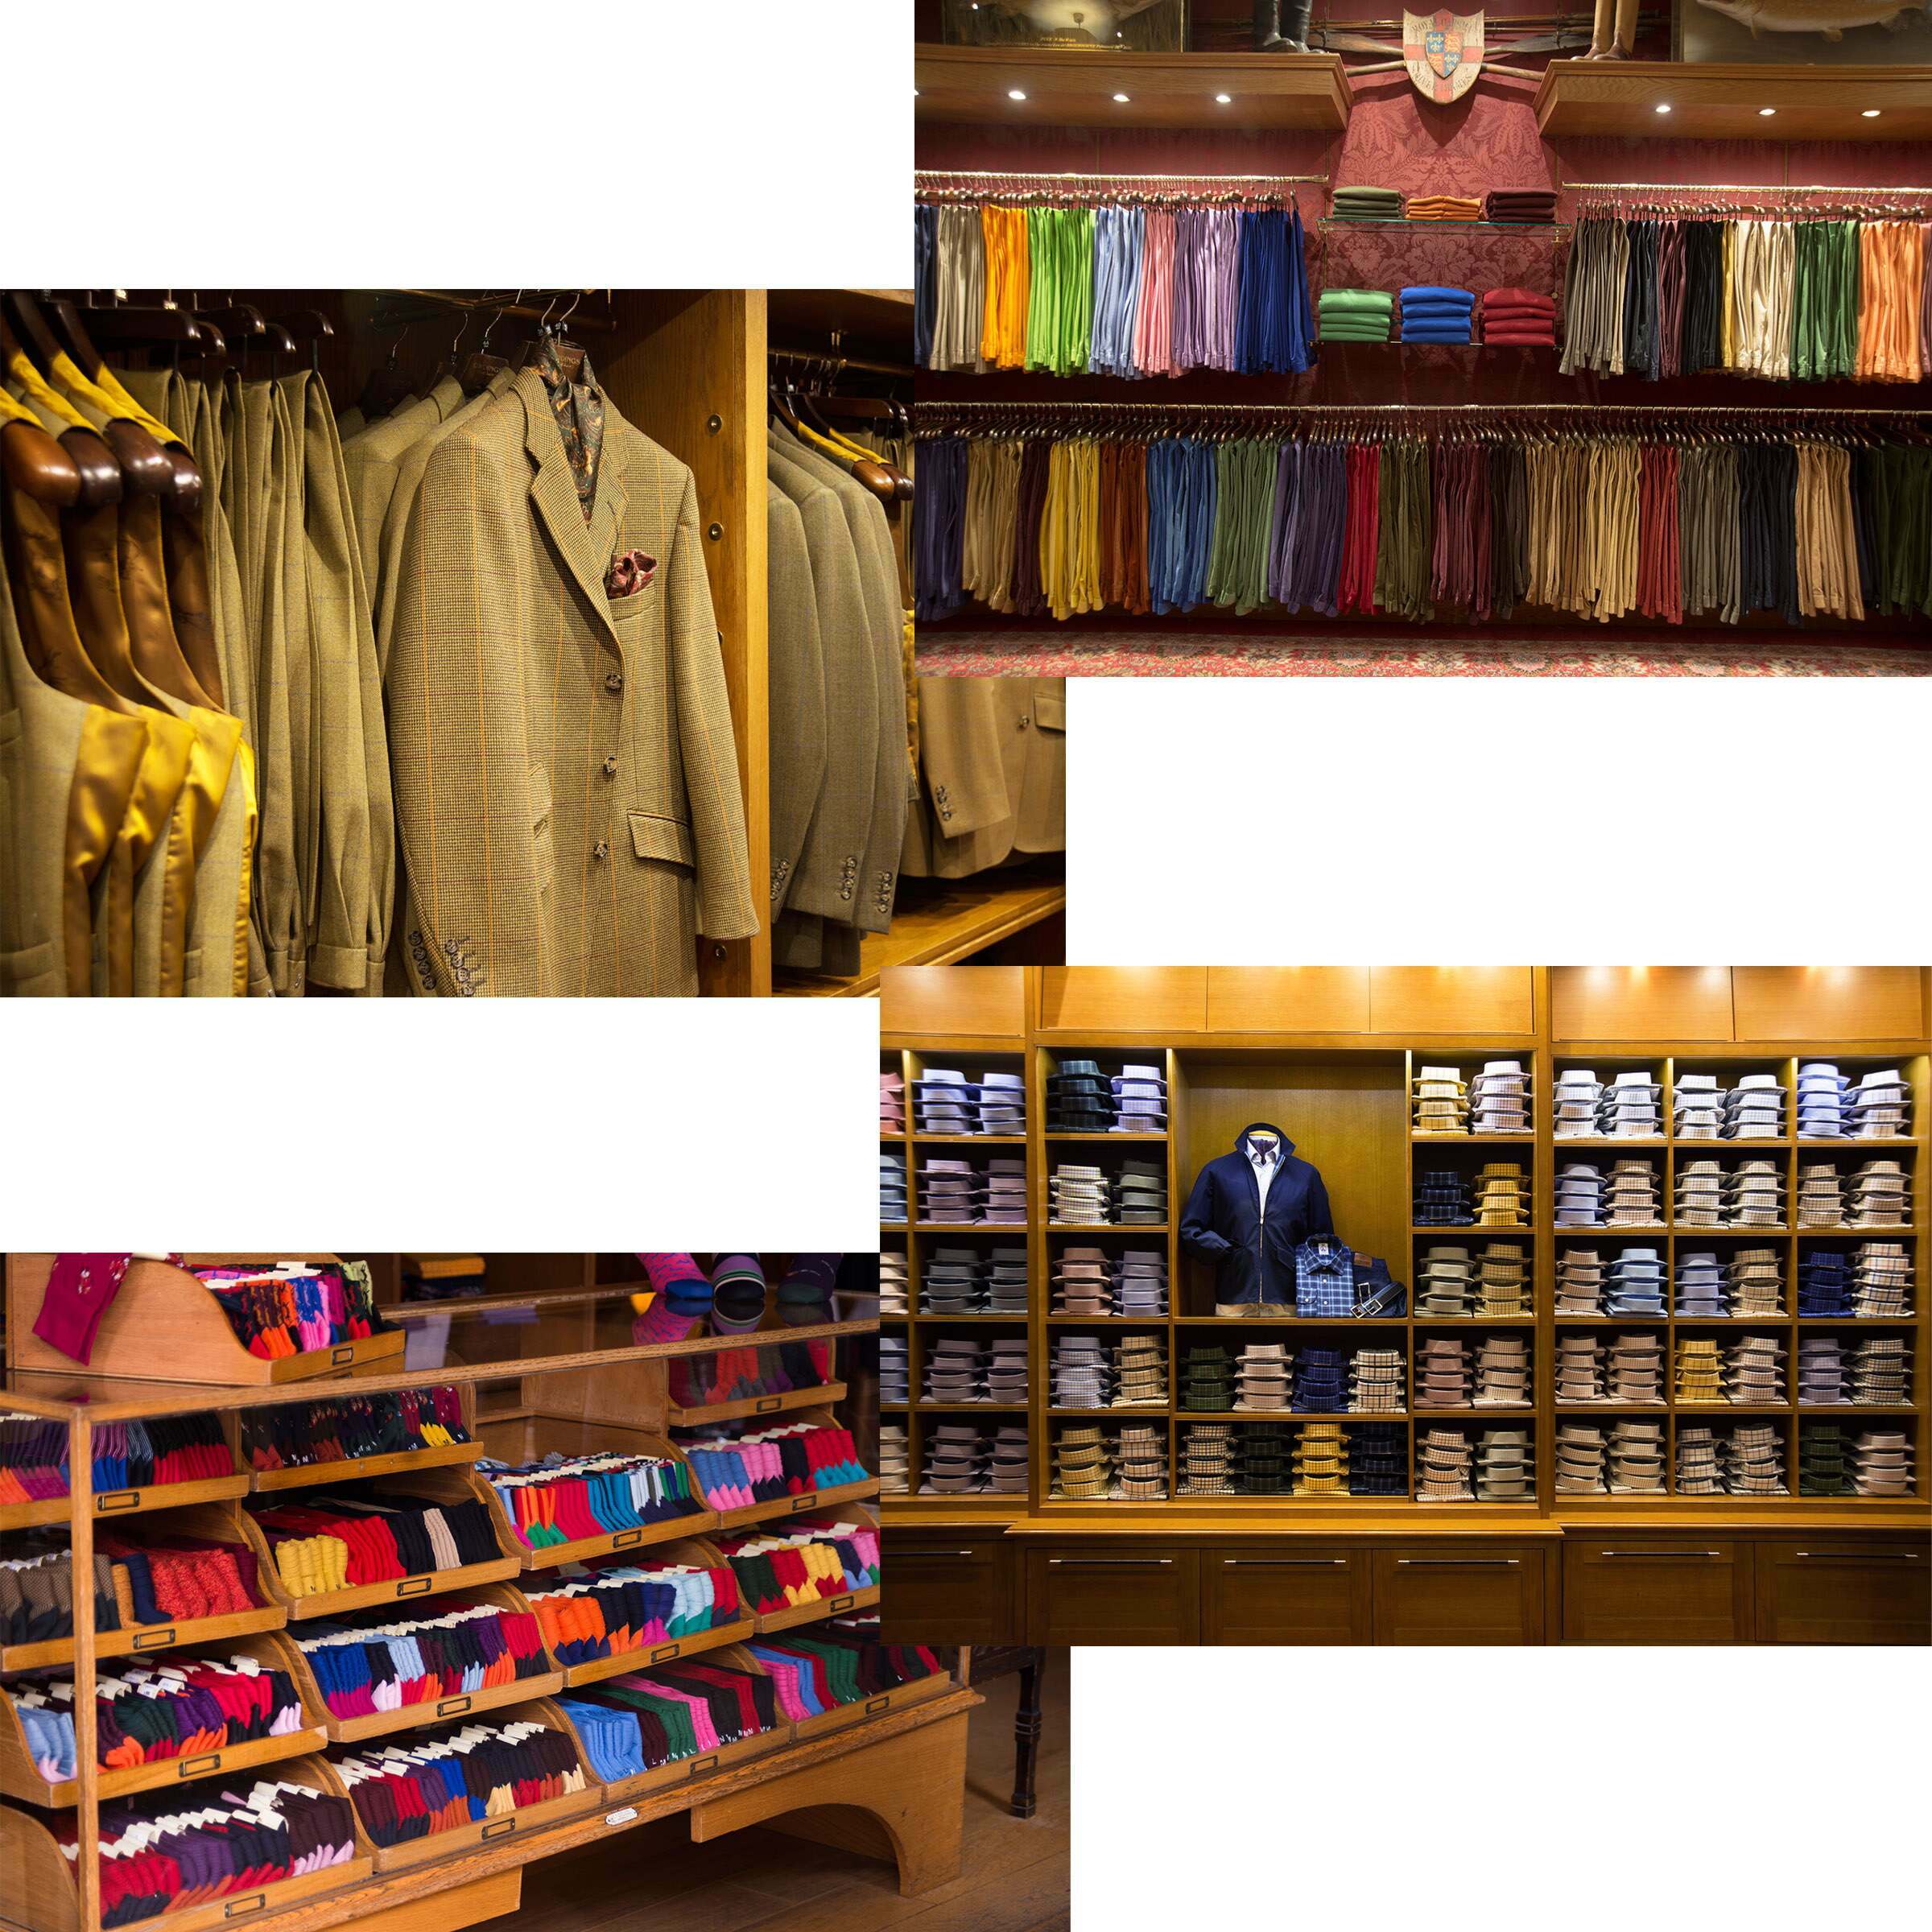 Interior of the store showing the ranges developed in the 1920's - still the cornerstones of the collection.